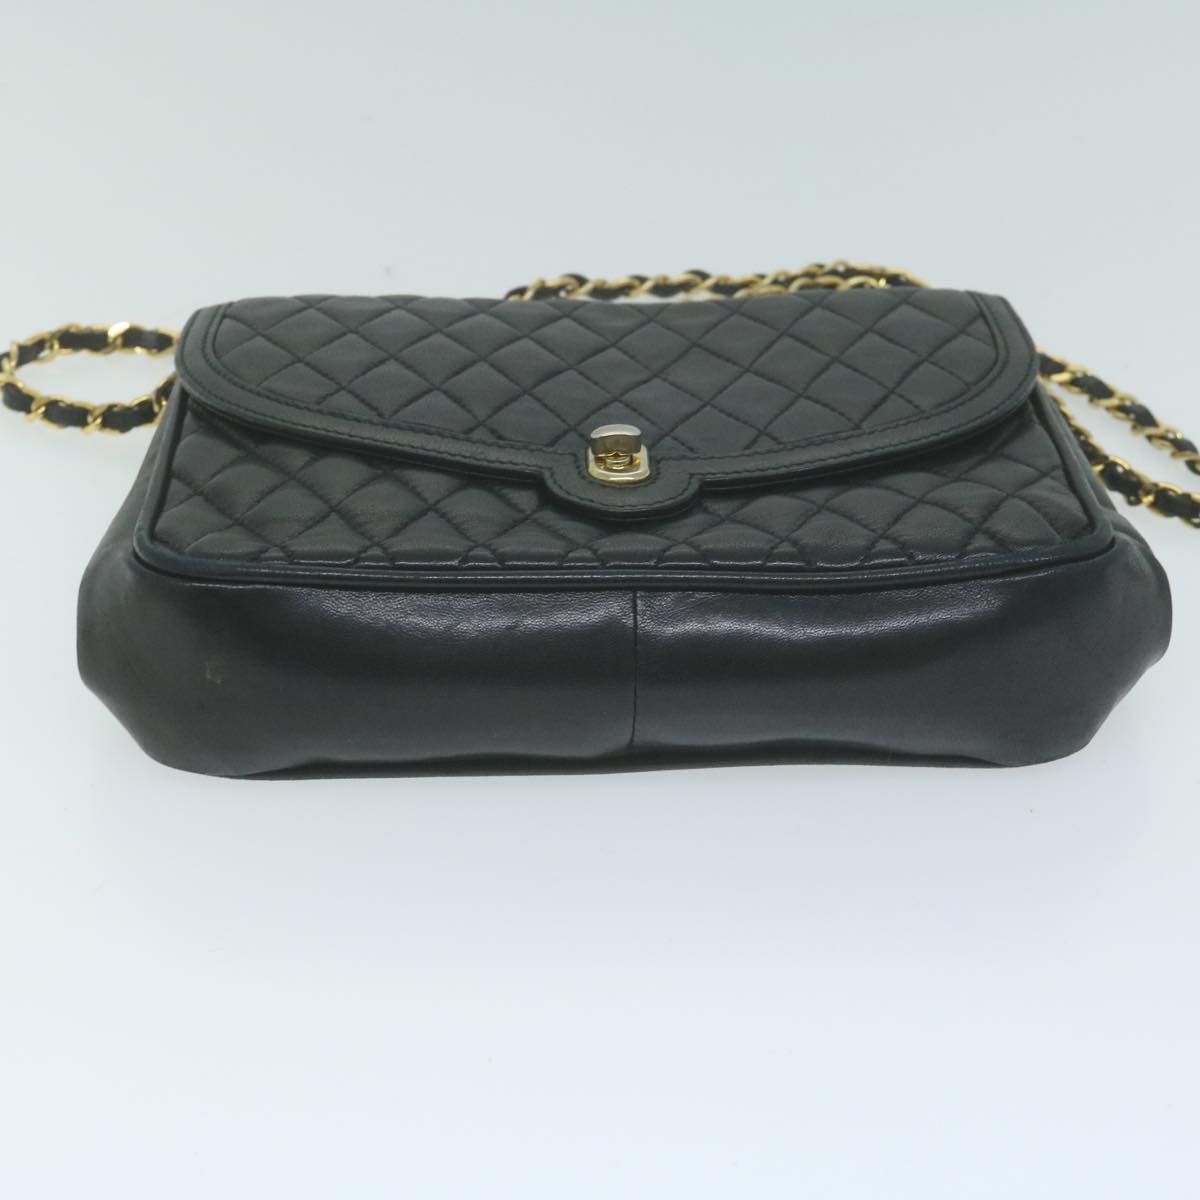 BALLY Quilted Chain Shoulder Bag Leather Black Auth 66071